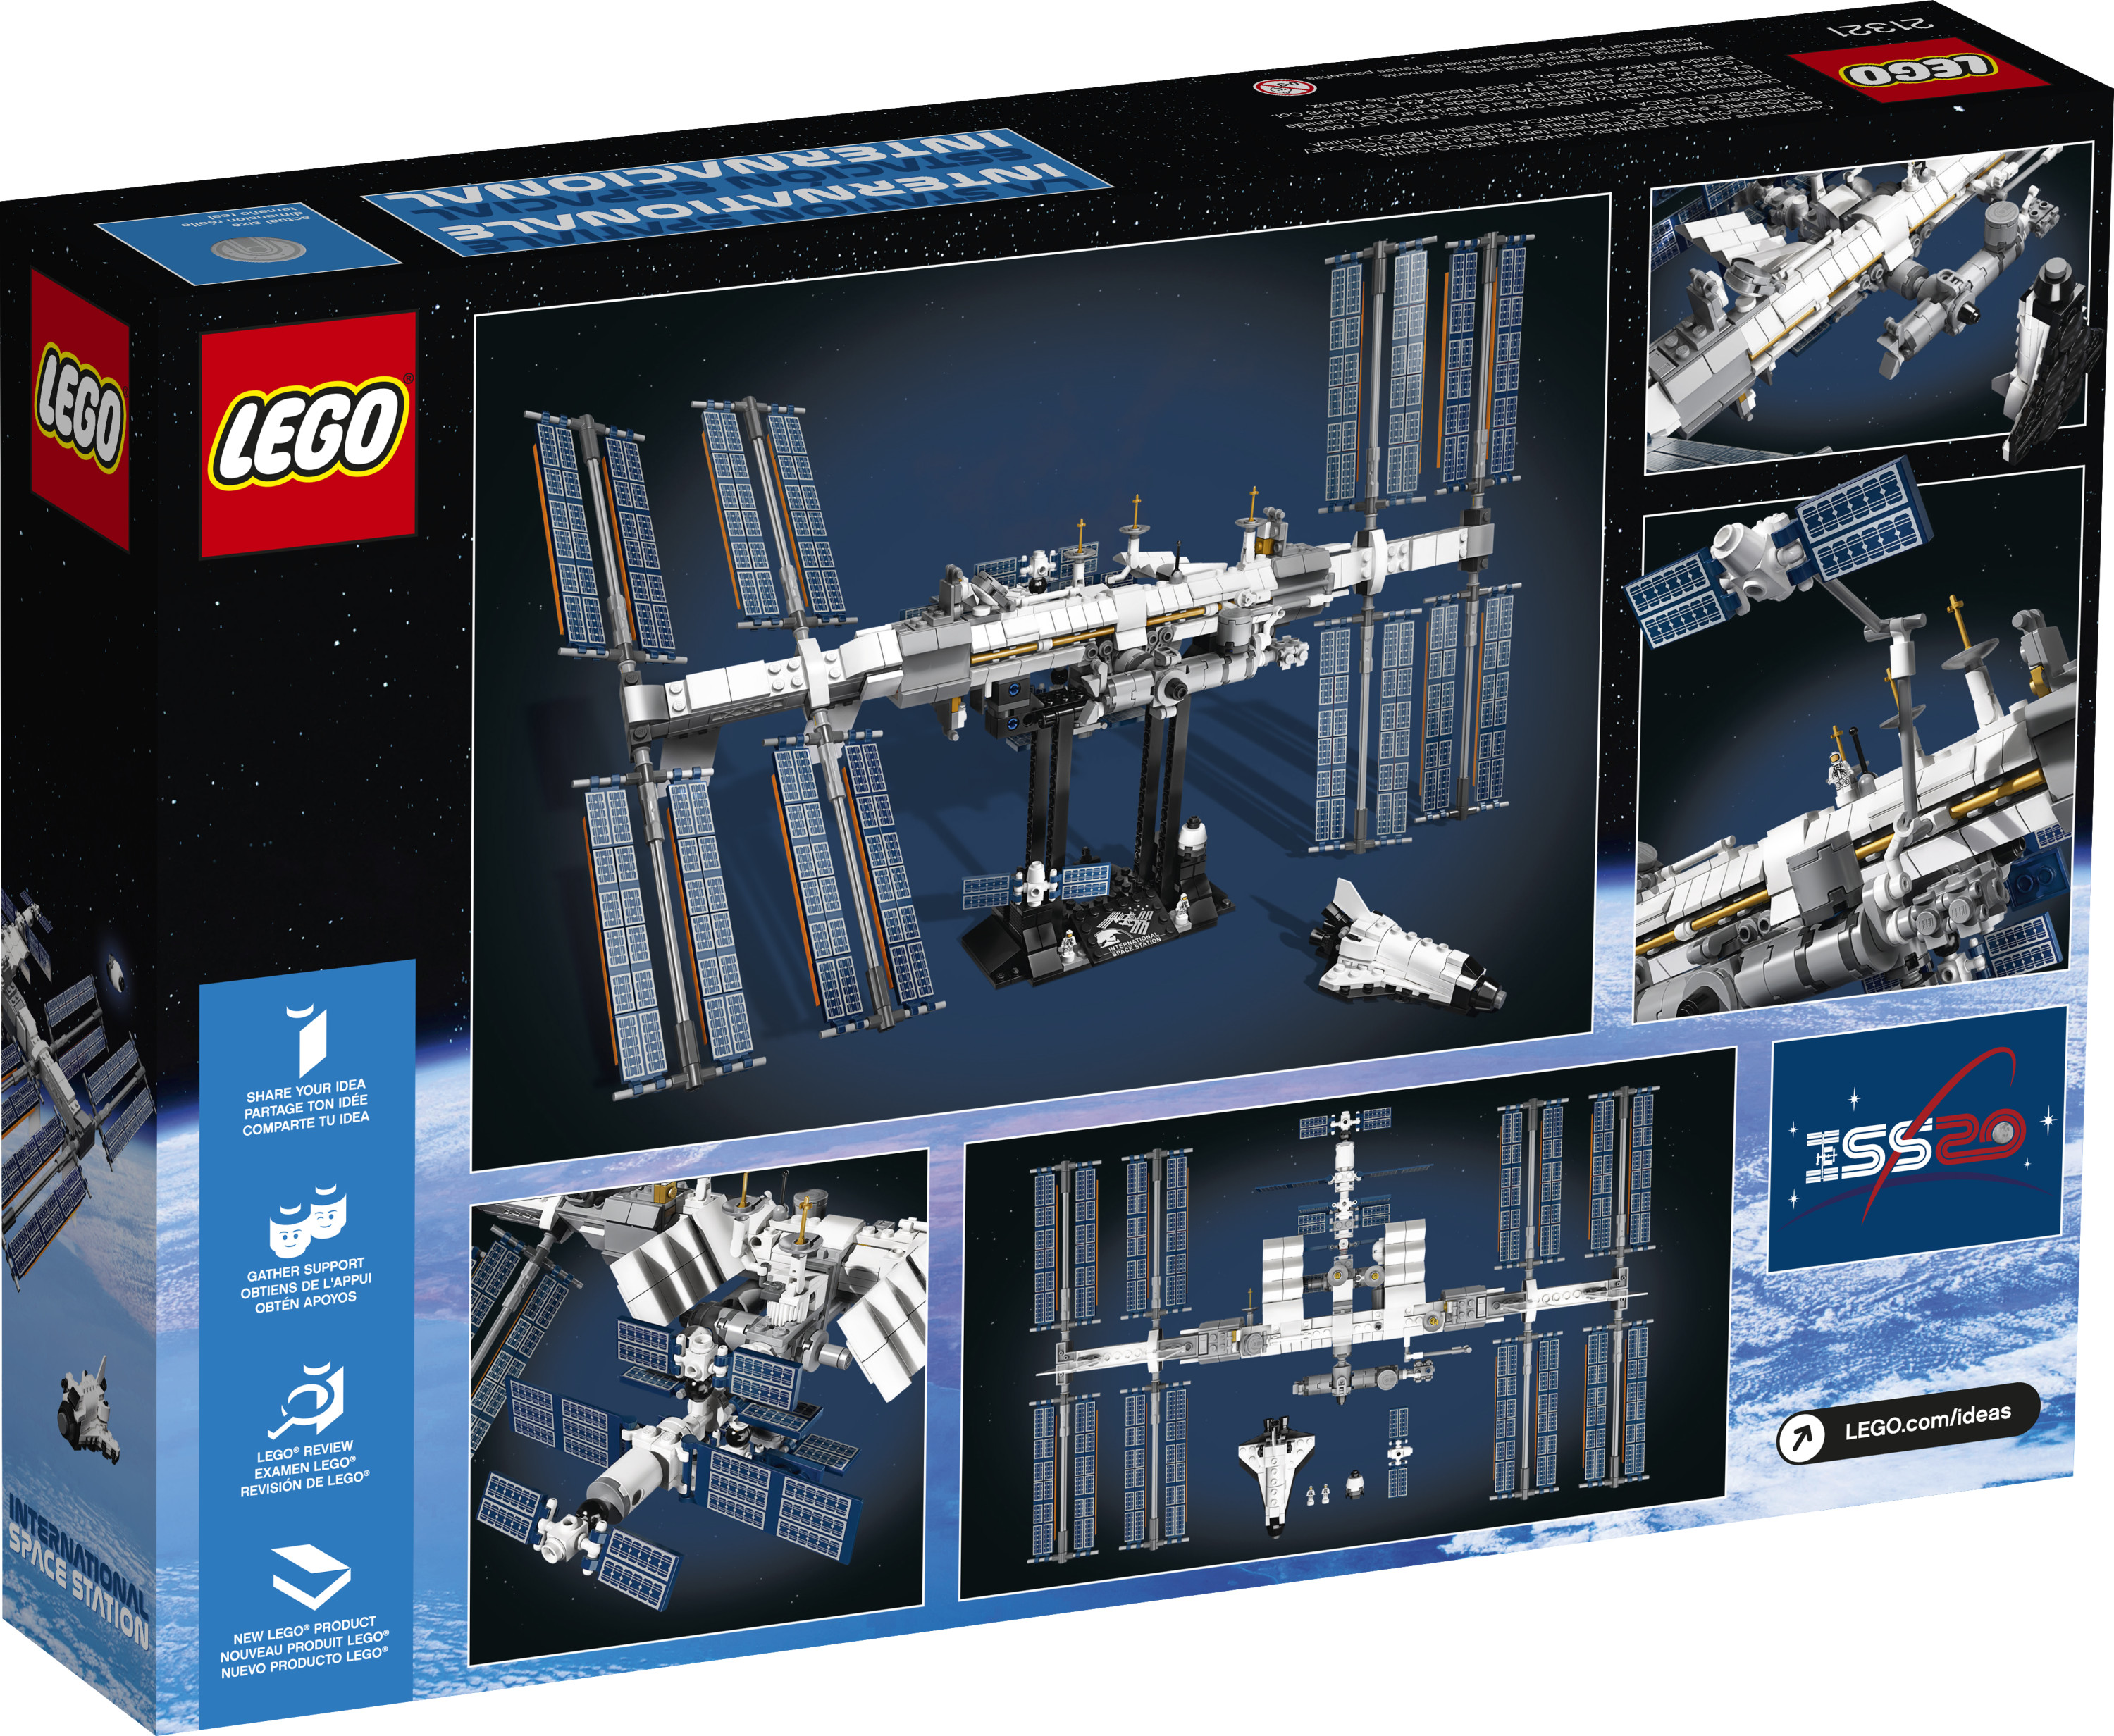 LEGO Ideas International Space Station 21321 Building Kit, Adult LEGO Set for Display (864 Pieces) - image 5 of 7